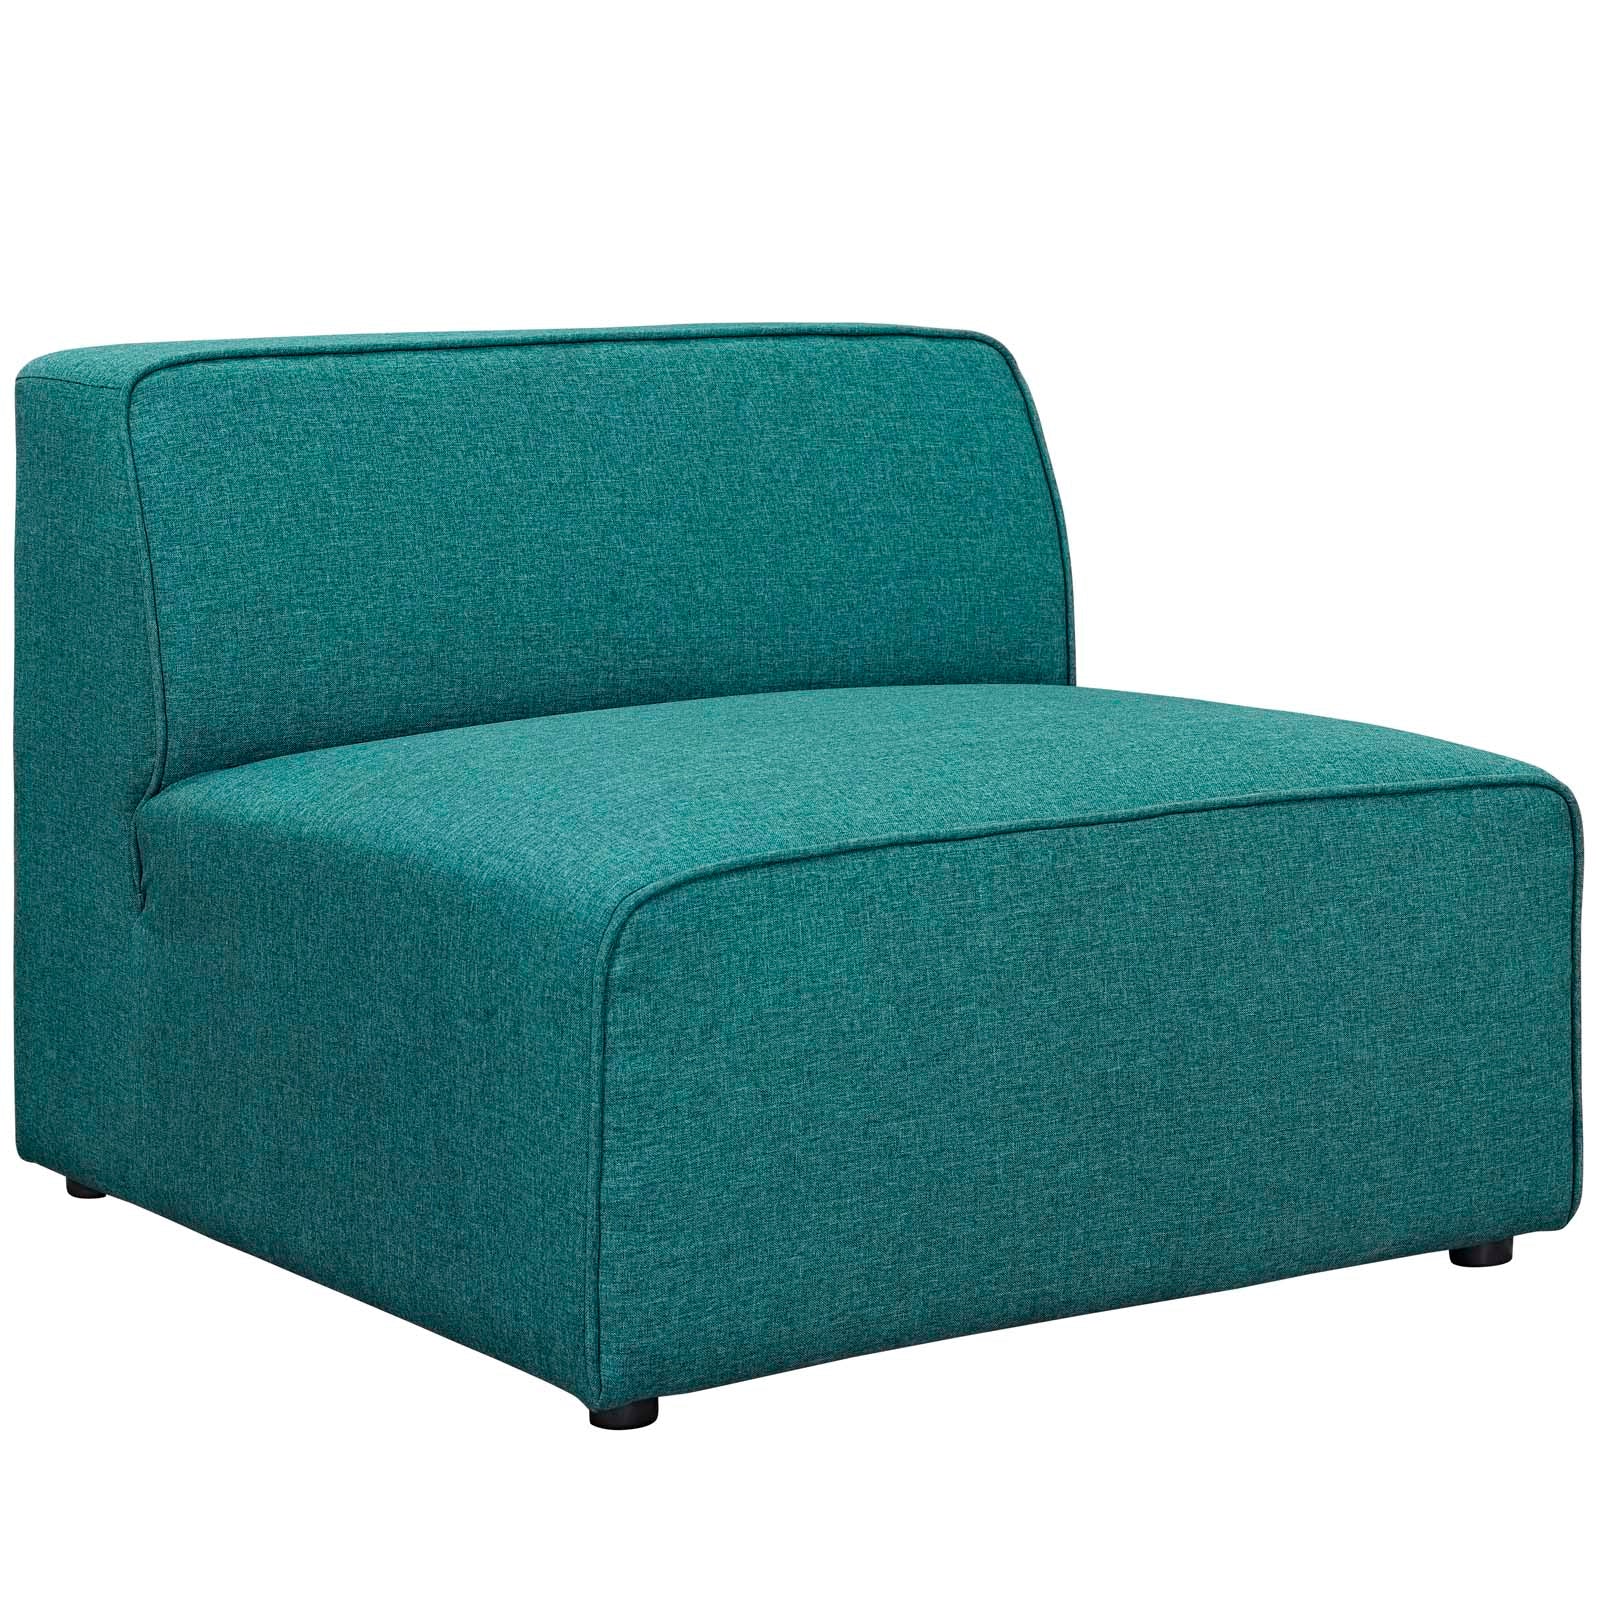 Modway Sectional Sofas - Mingle 7 Piece Upholstered 149.5"W Fabric Sectional Sofa Set Teal